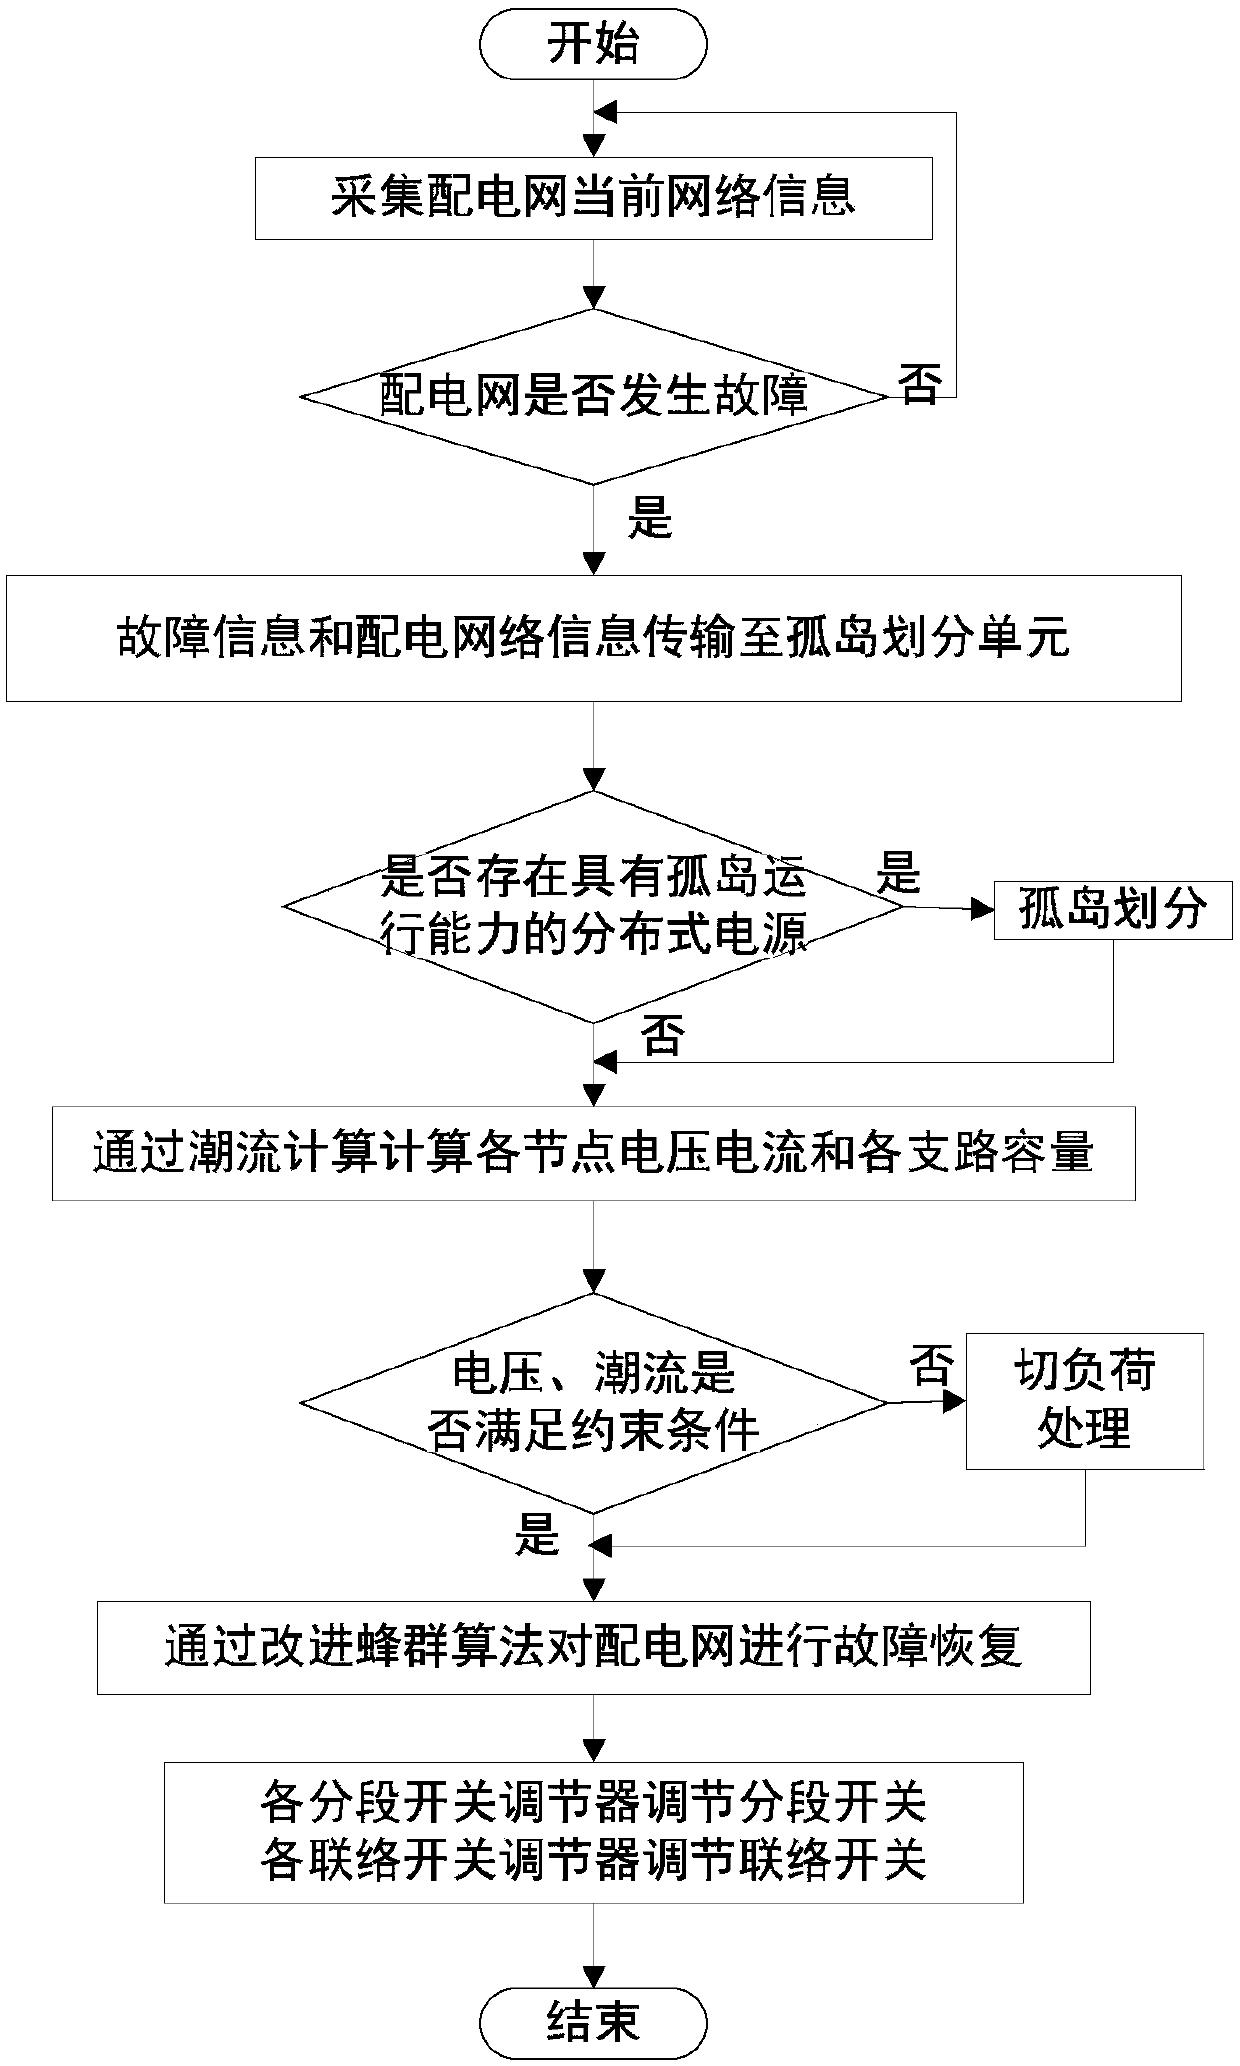 System and method for complex distribution network fault recovery by considering multiple targets